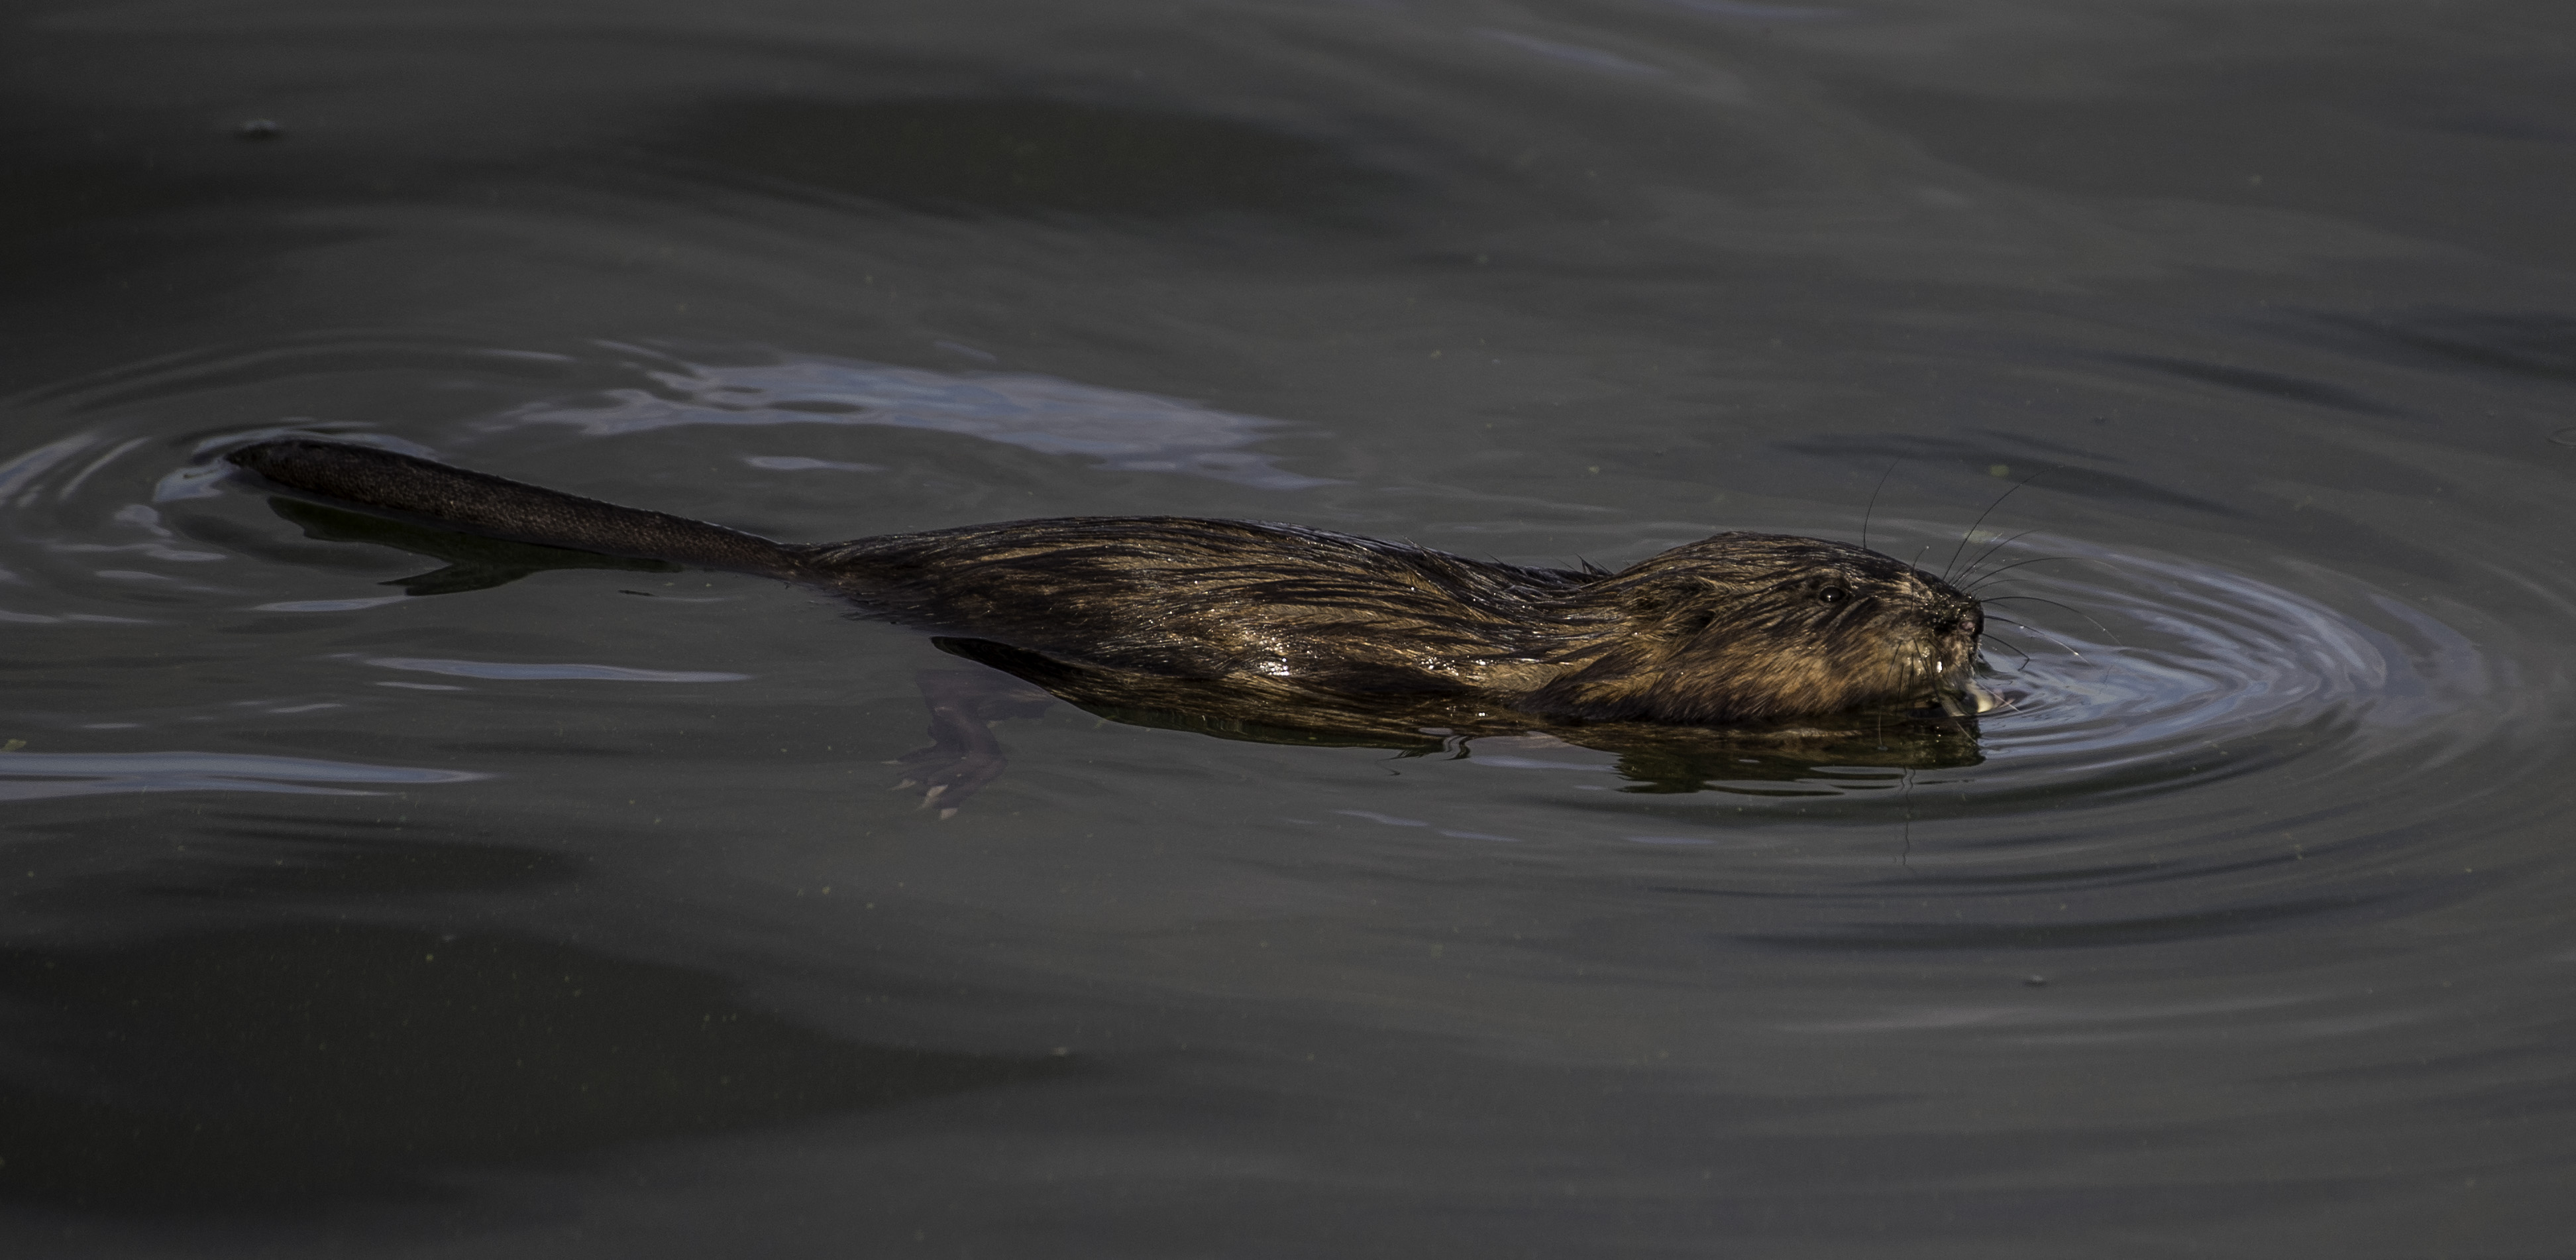 Muskrat swimming in the water image - Free stock photo - Public ...